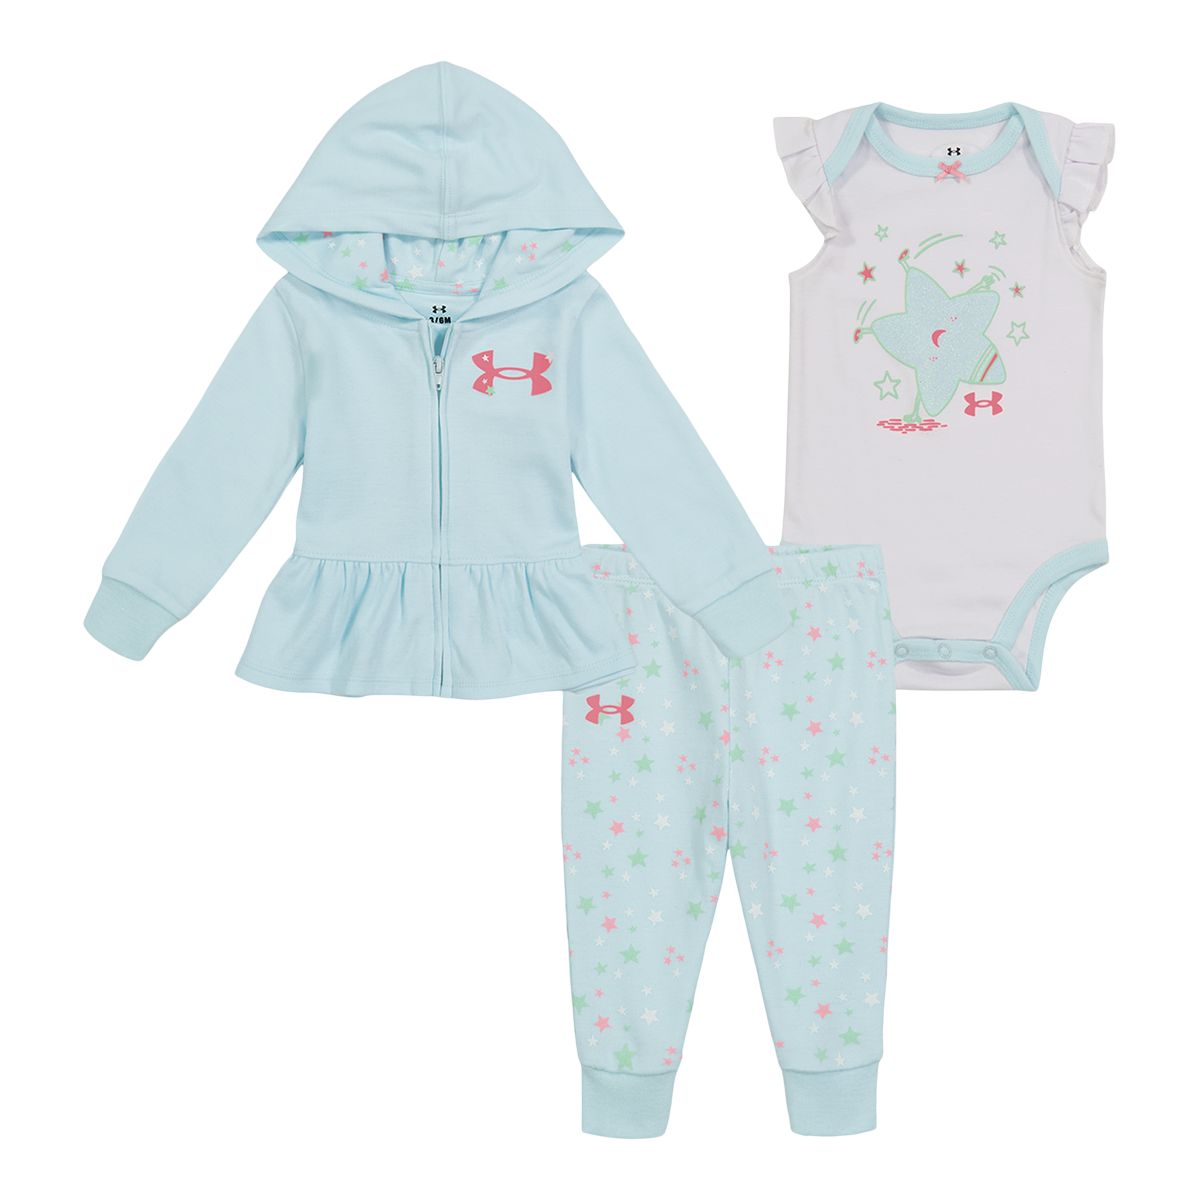 Under Armour Infant Girls' All Star Take Me Home Set